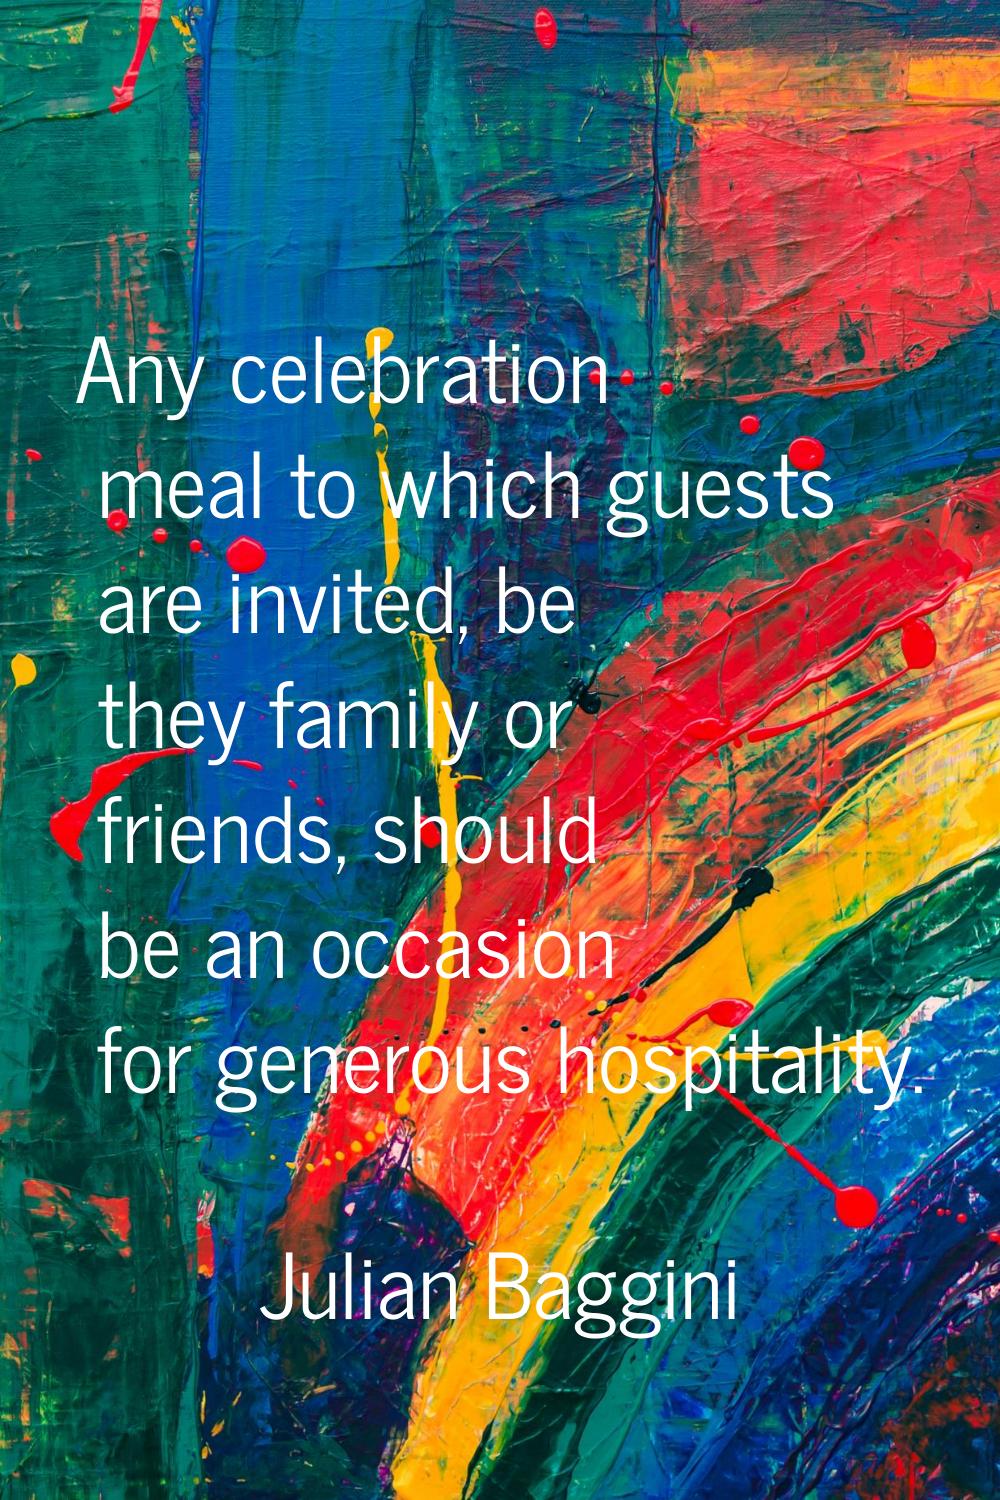 Any celebration meal to which guests are invited, be they family or friends, should be an occasion 